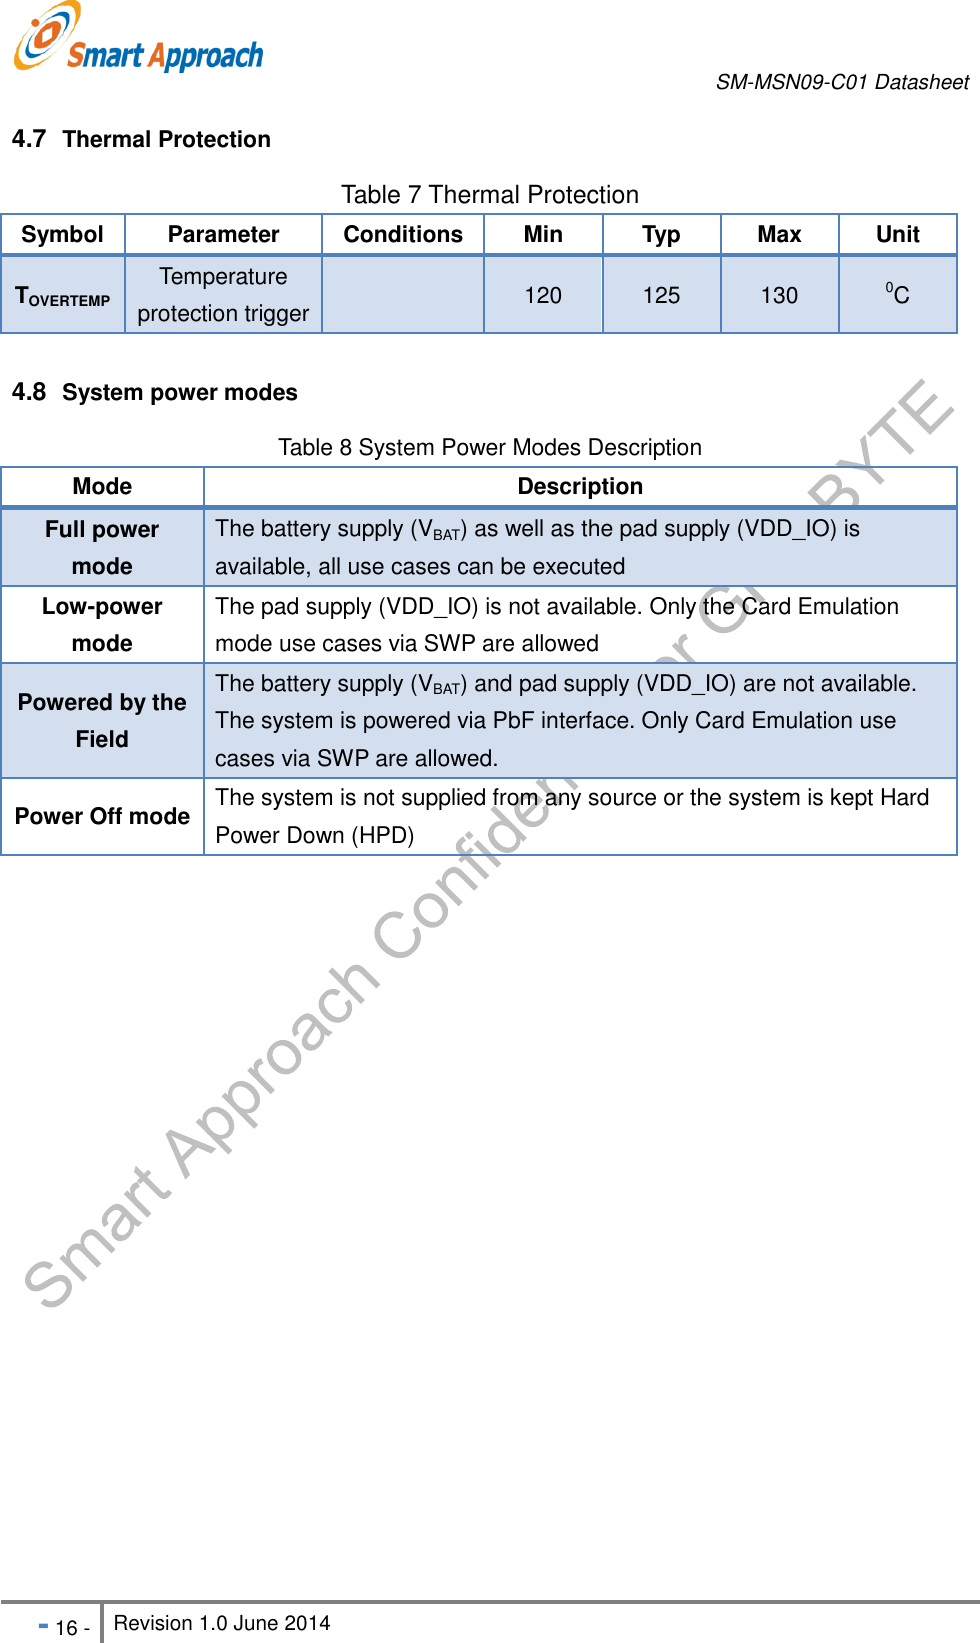       SM-MSN09-C01 Datasheet   - 16 - Revision 1.0 June 2014                                                            4.7  Thermal Protection Table 7 Thermal Protection Symbol Parameter Conditions Min Typ Max Unit TOVERTEMP Temperature protection trigger  120 125 130 0C  4.8  System power modes Table 8 System Power Modes Description Mode Description Full power mode The battery supply (VBAT) as well as the pad supply (VDD_IO) is available, all use cases can be executed Low-power mode The pad supply (VDD_IO) is not available. Only the Card Emulation mode use cases via SWP are allowed Powered by the Field The battery supply (VBAT) and pad supply (VDD_IO) are not available. The system is powered via PbF interface. Only Card Emulation use cases via SWP are allowed. Power Off mode The system is not supplied from any source or the system is kept Hard Power Down (HPD)  